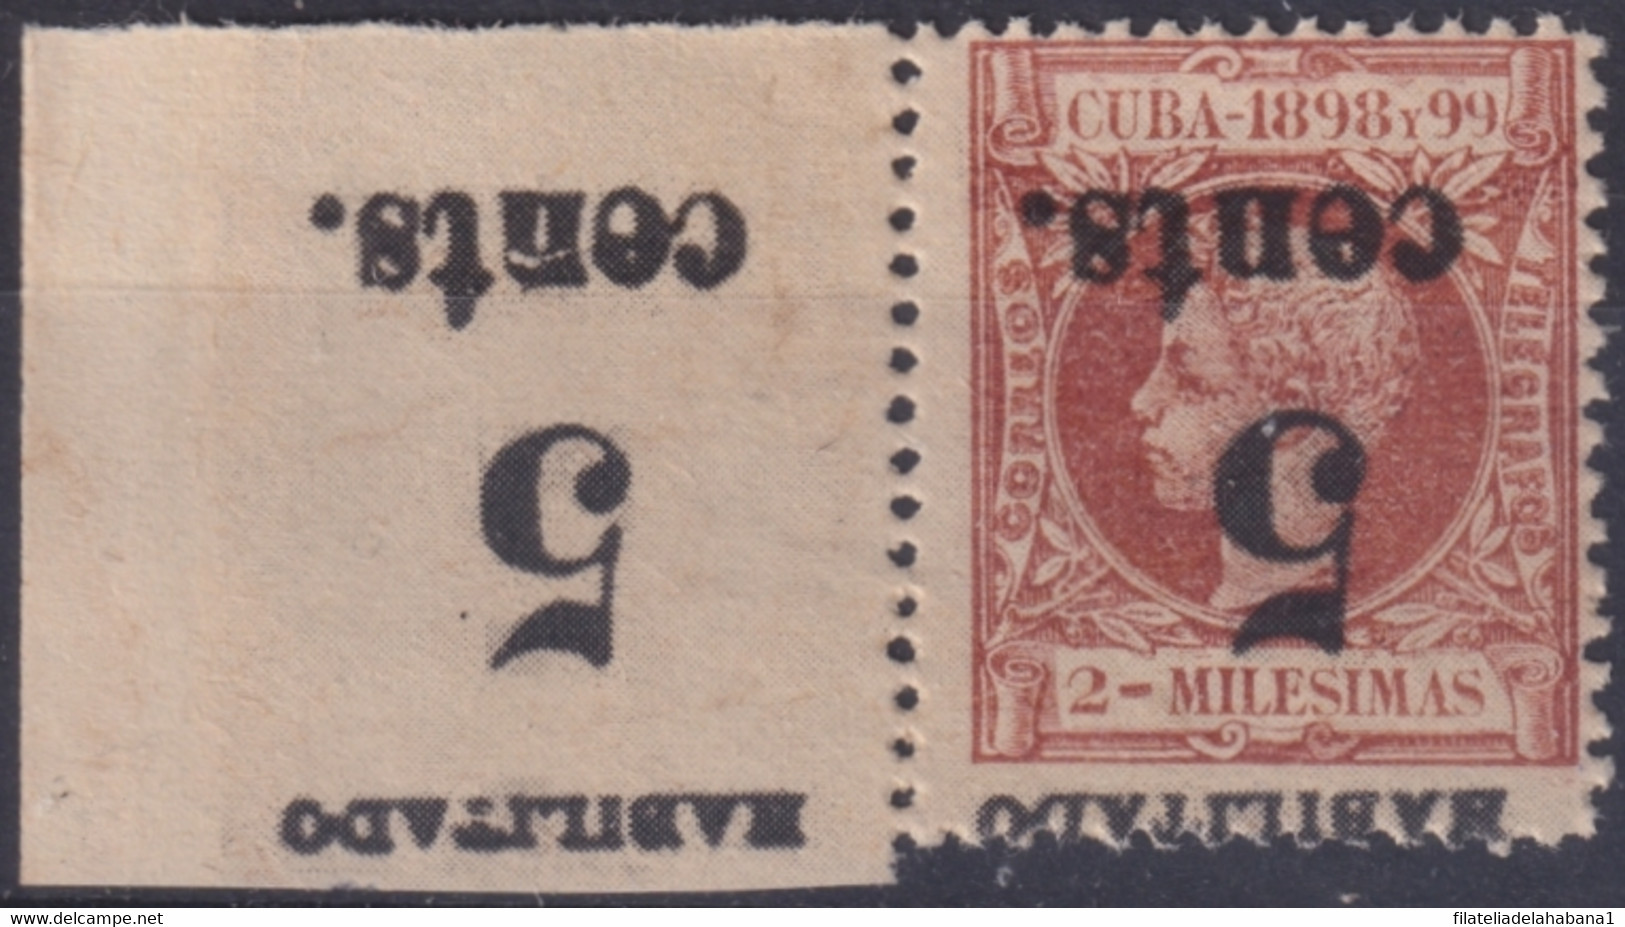 1899-484 CUBA 1899 5c S. 2m US OCCUPATION 2th ISSUE INVERTED PHILATELIC FORGERY. - Unused Stamps